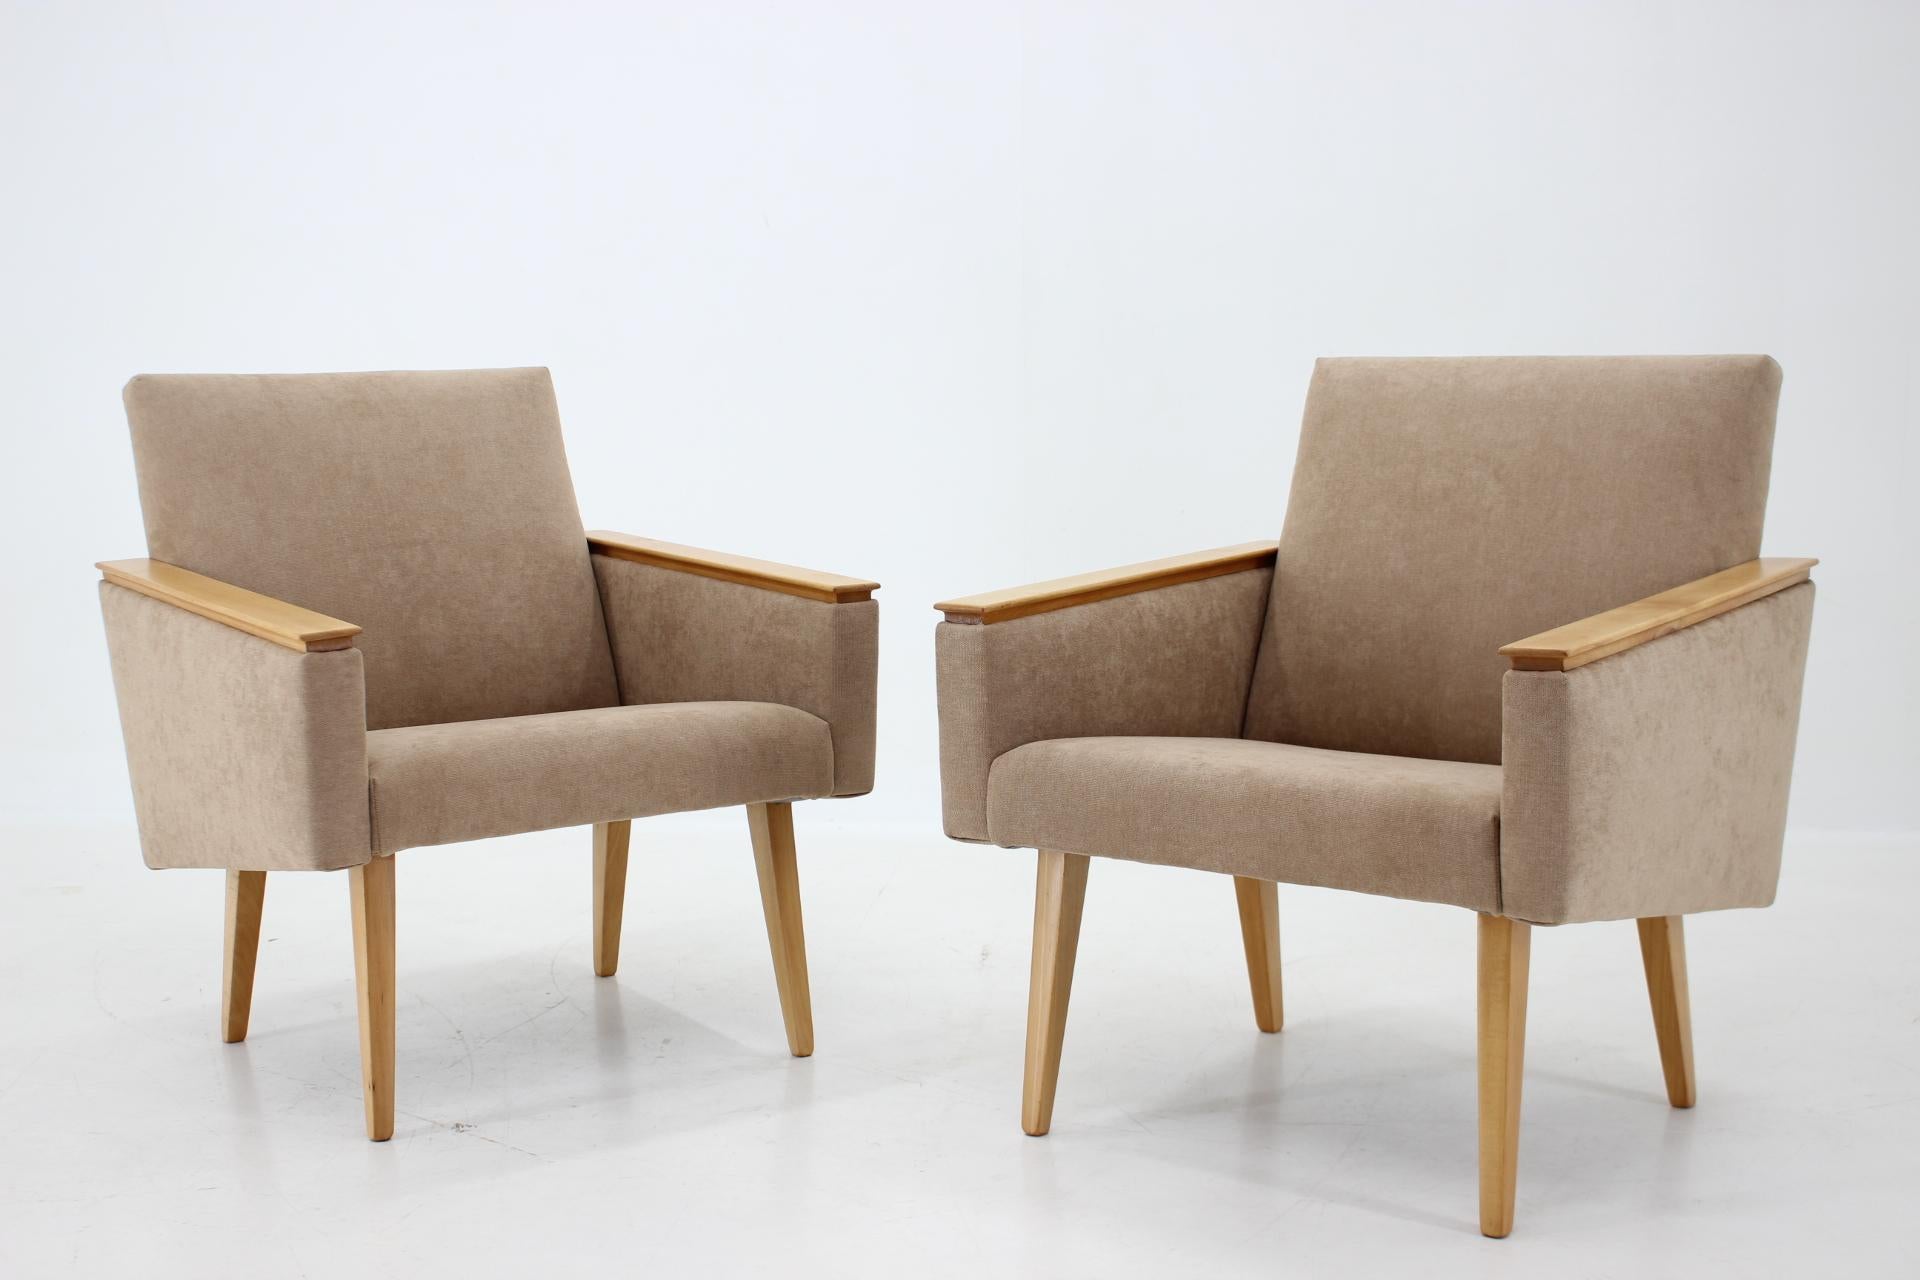 - Newly upholstered 
- Beech wooden parts have been refurbished.